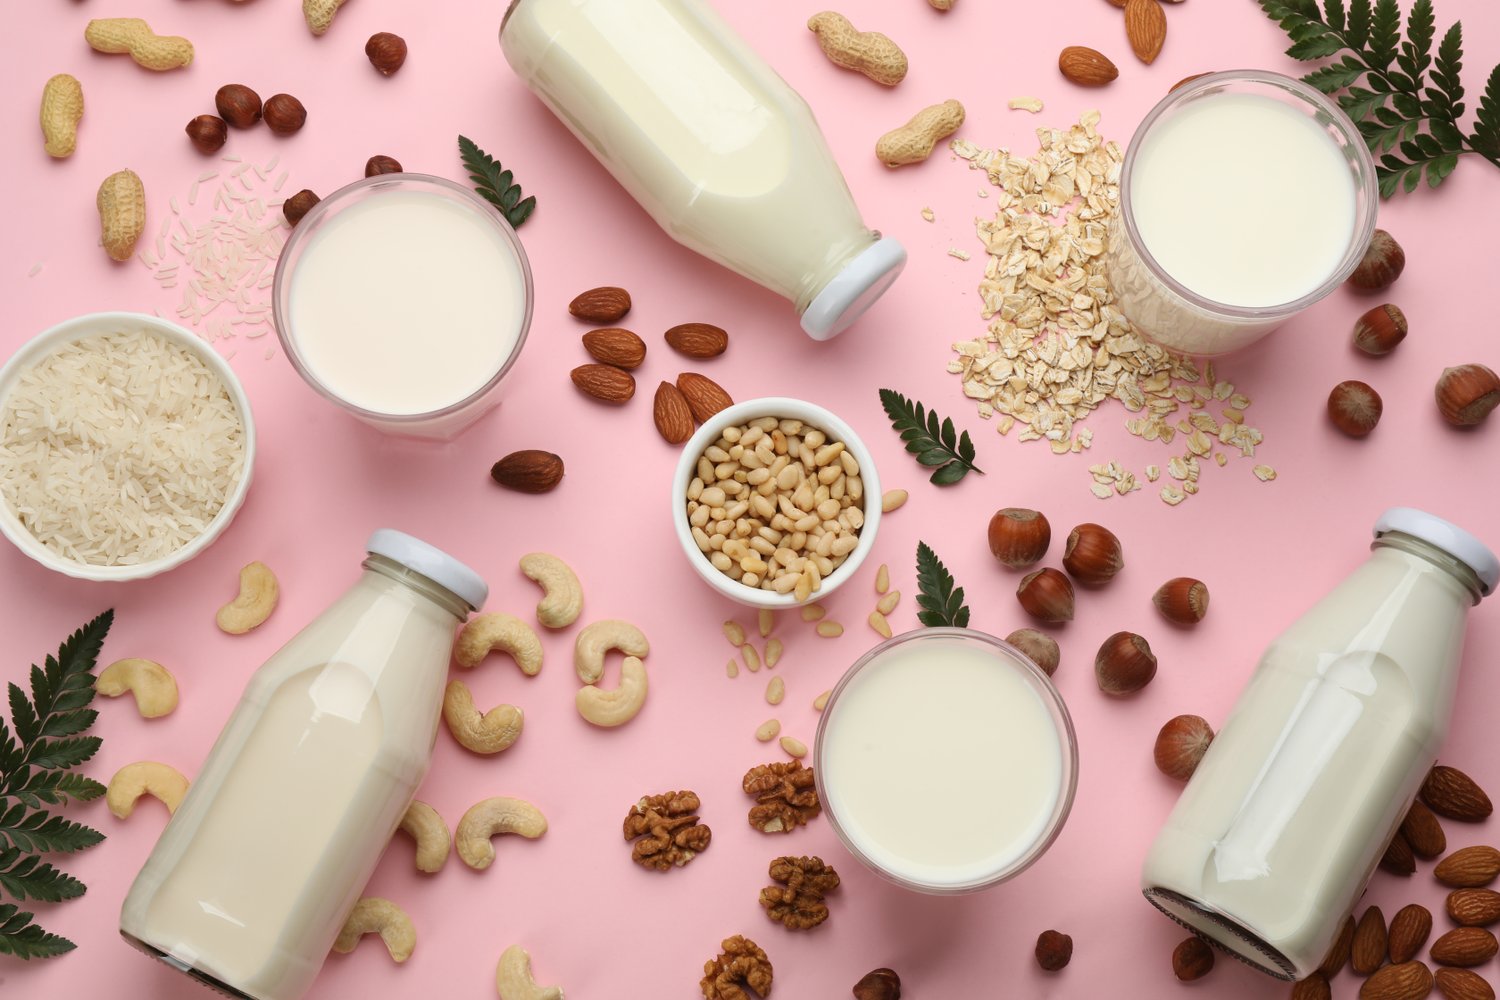 This milk is nuts: all you wanted to know about non-dairy milk